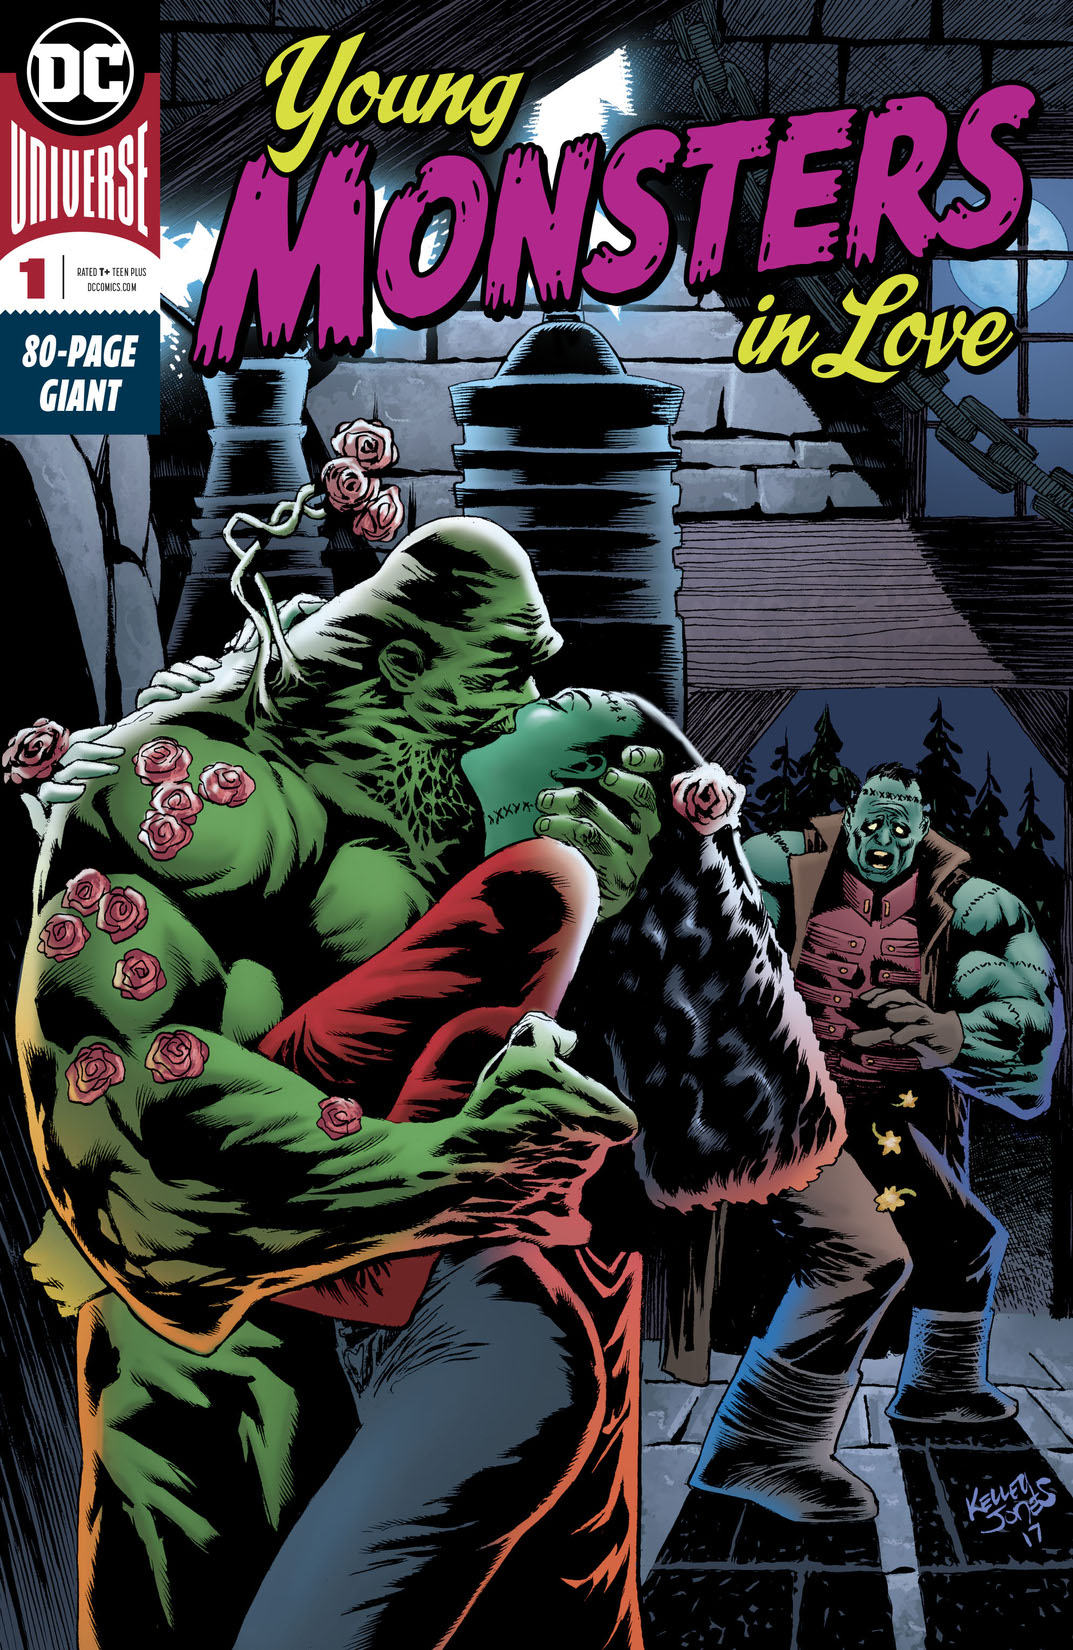 Young Monsters in Love #1 preview images